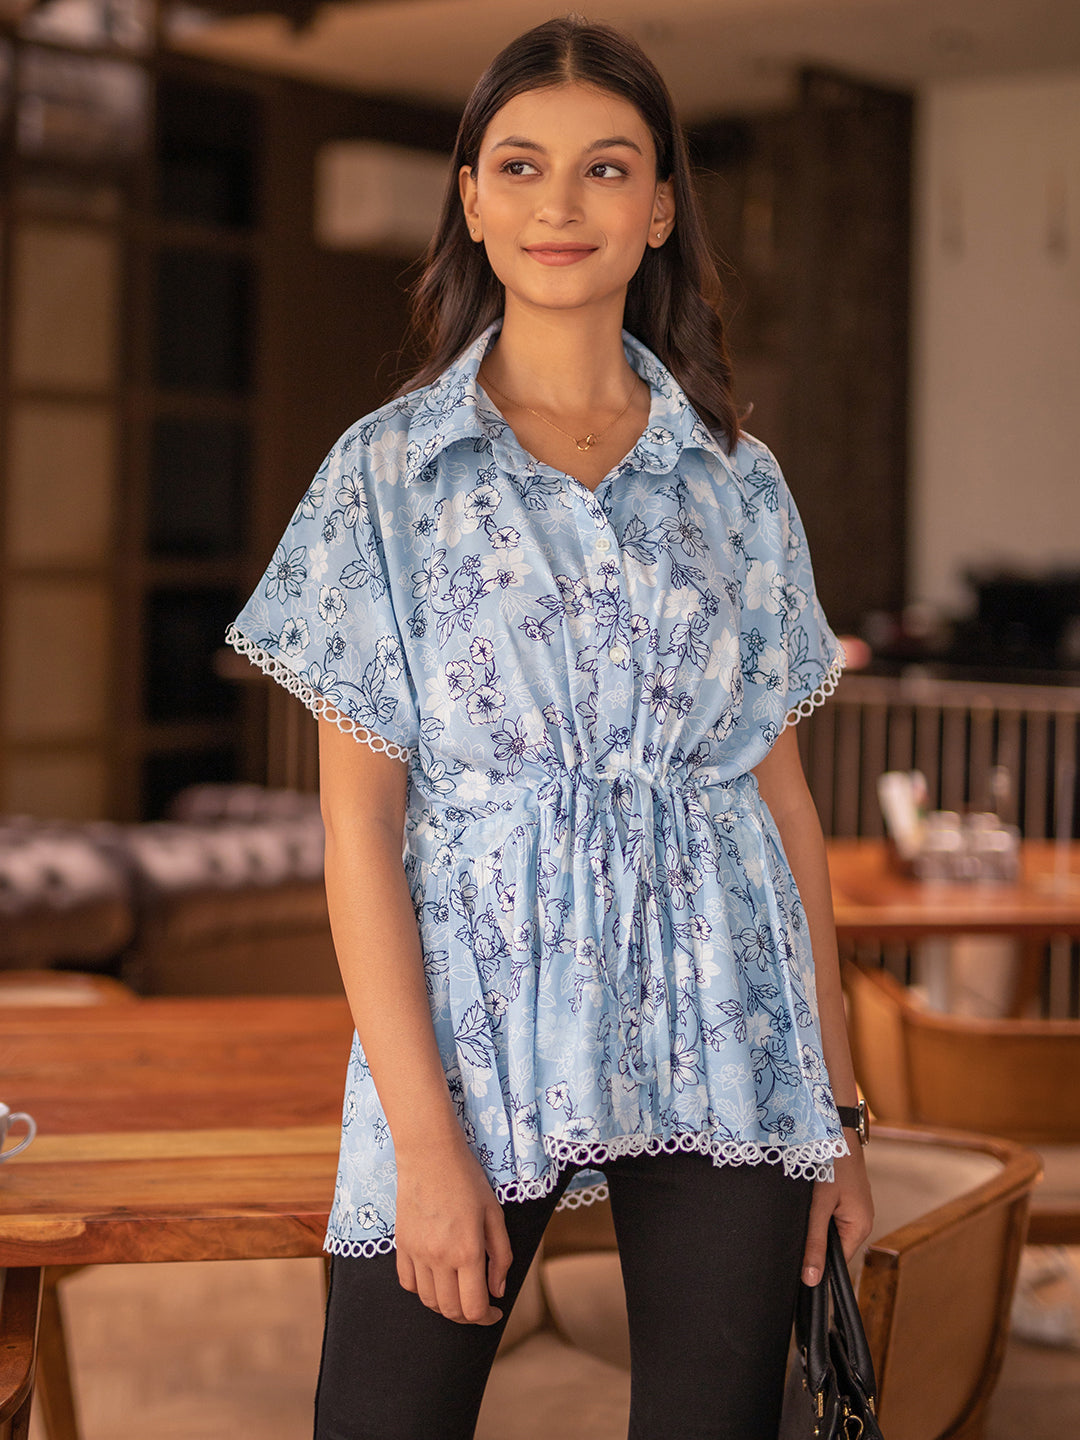 Shades of Blue Batwing Top